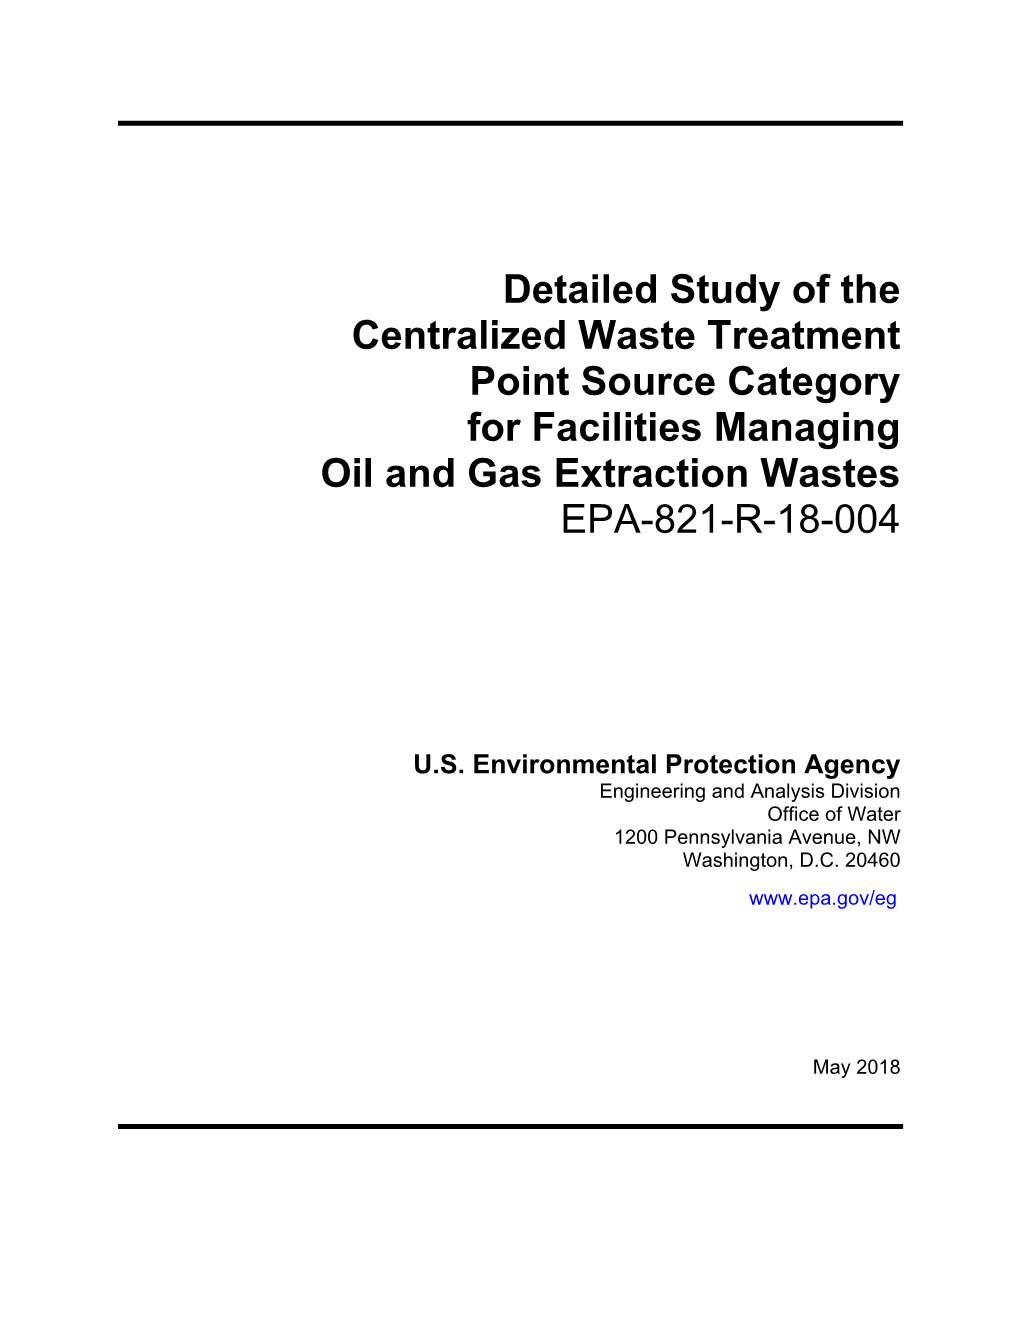 Centralized Waste Treatment Point Source Category for Facilities Managing Oil and Gas Extraction Wastes EPA-821-R-18-004